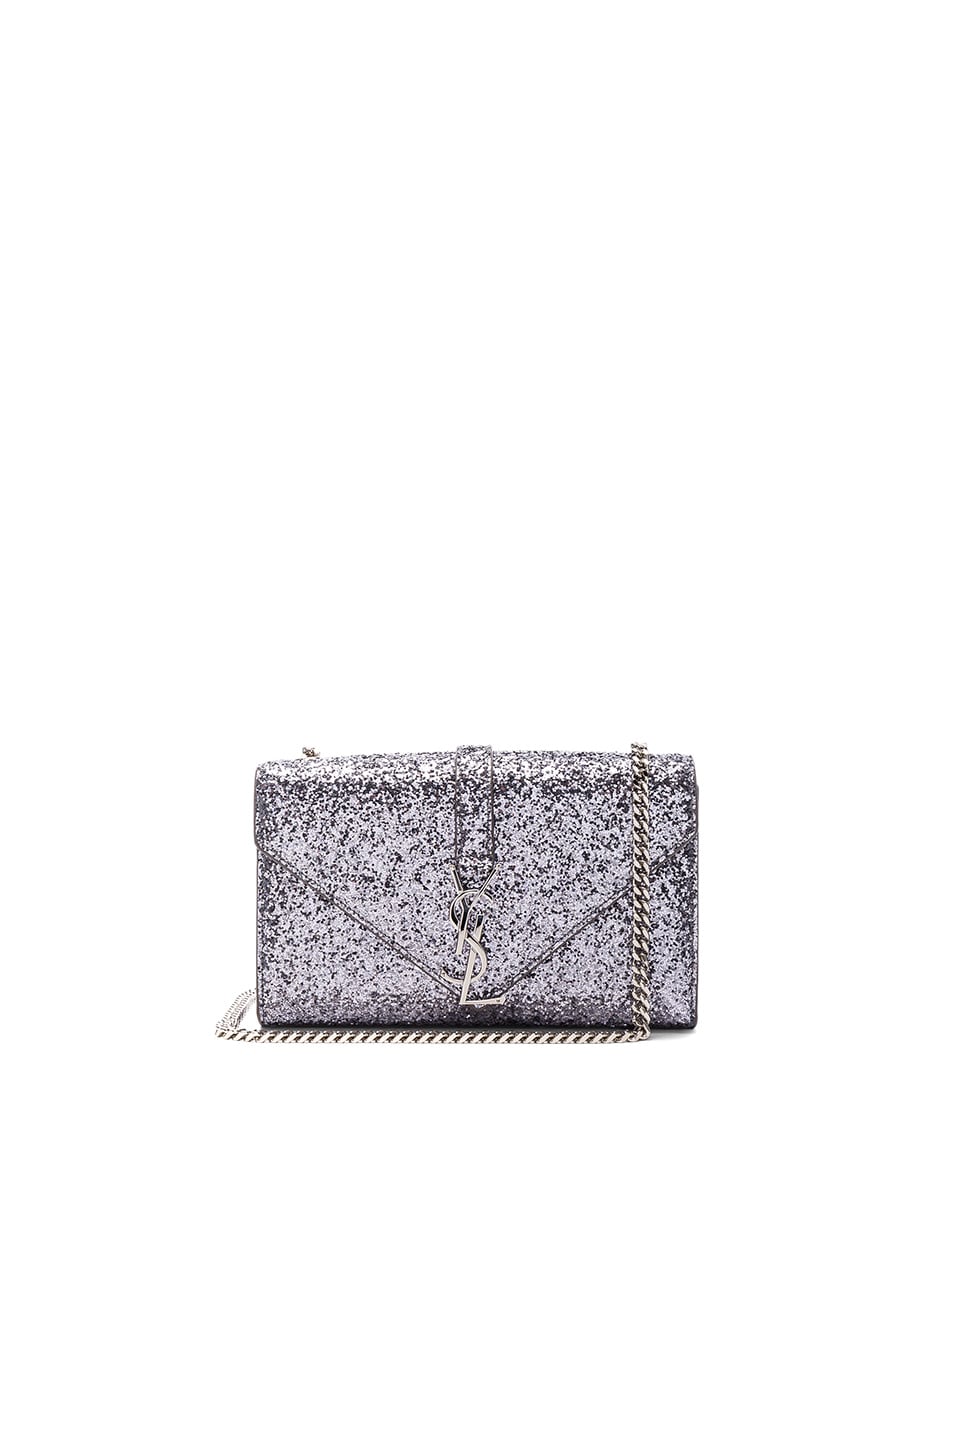 Image 1 of Saint Laurent Small Monogramme Glitter Chain Bag in Grey